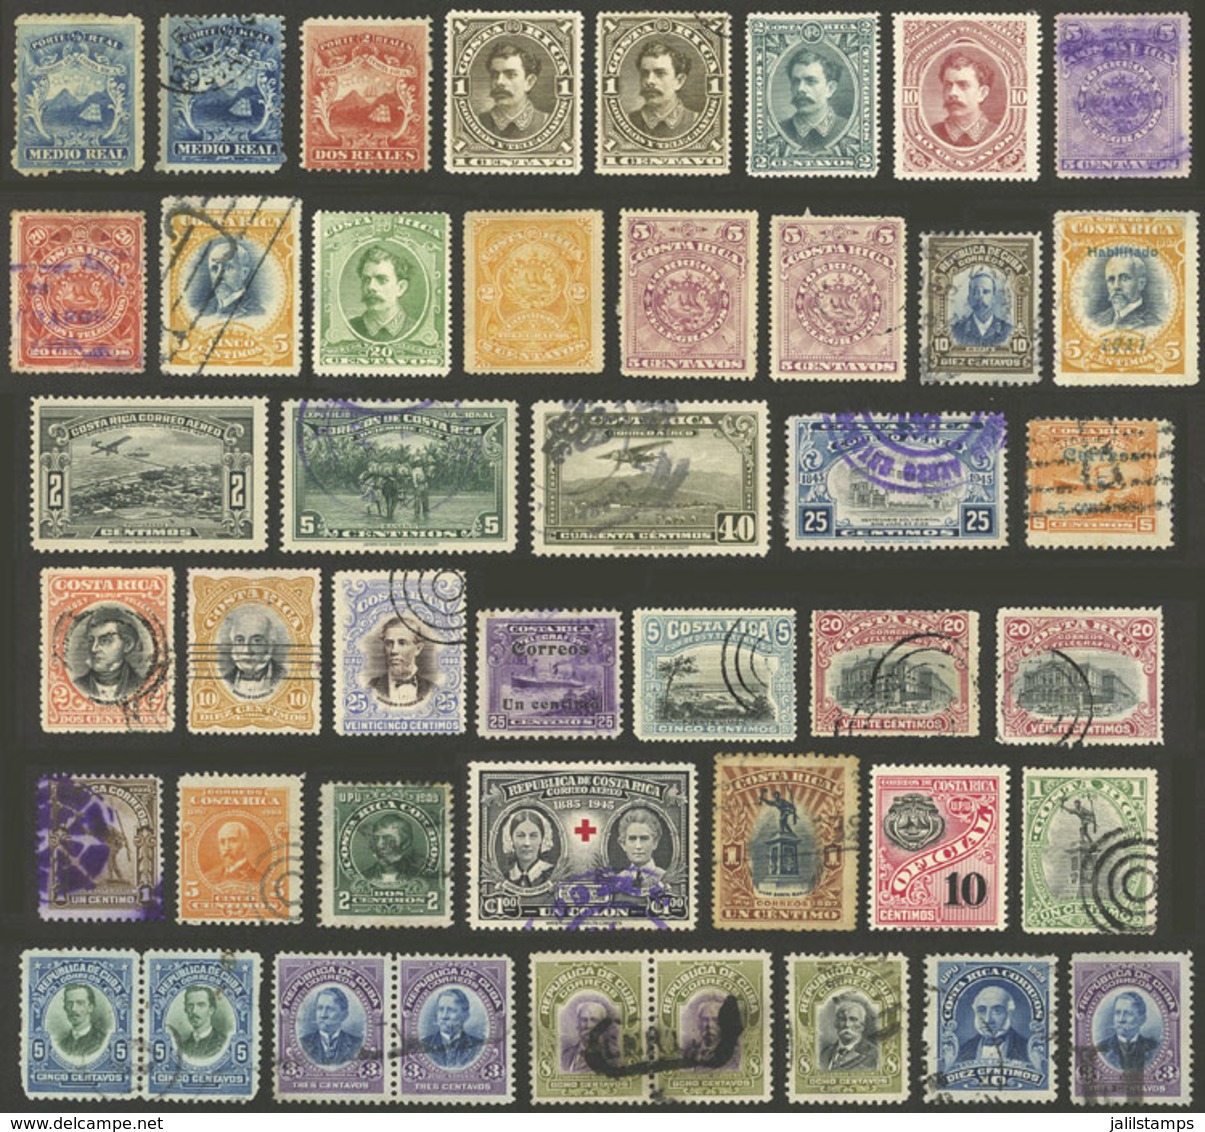 COSTA RICA: Small And Interesting Lot Of Old Stamps, Used Or Mint, VF General Quality! - Costa Rica